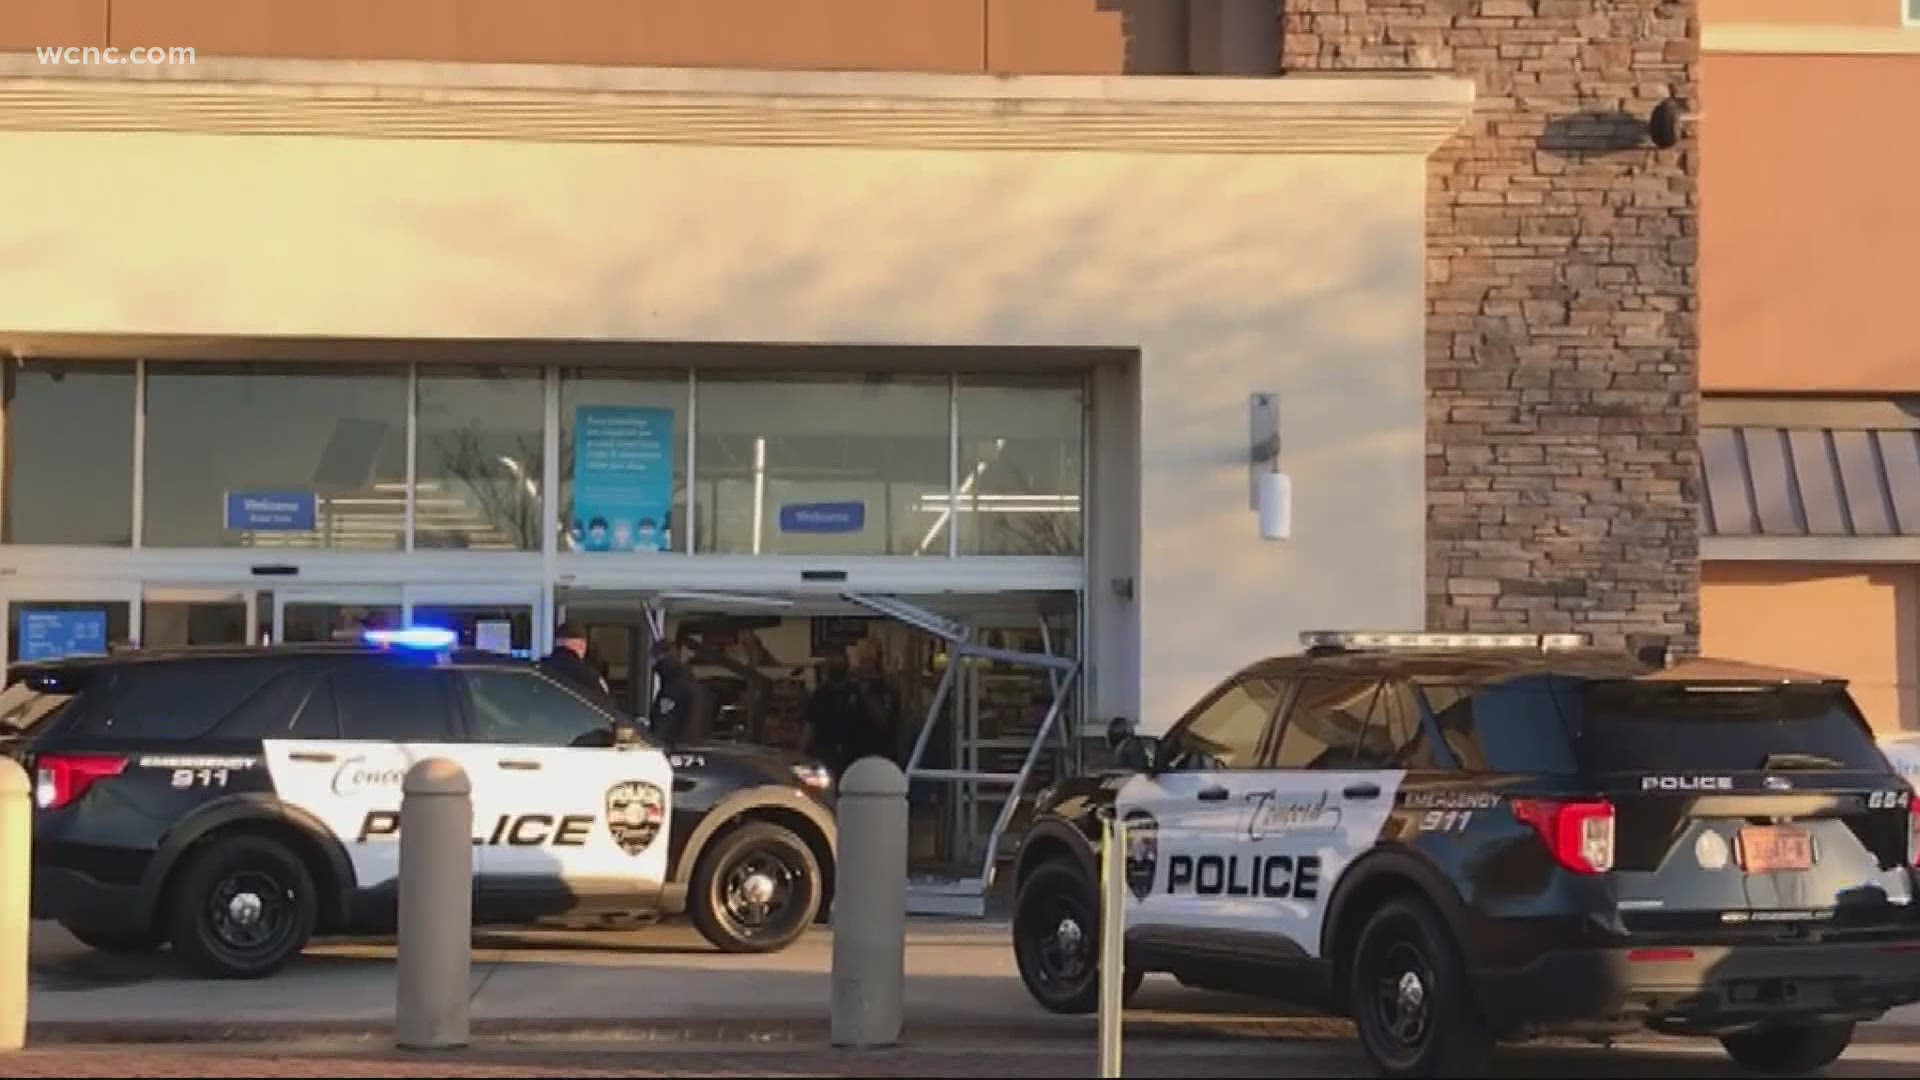 Police said one person is in custody after driving a car into the Walmart store on Thunder Road in Concord Friday morning.